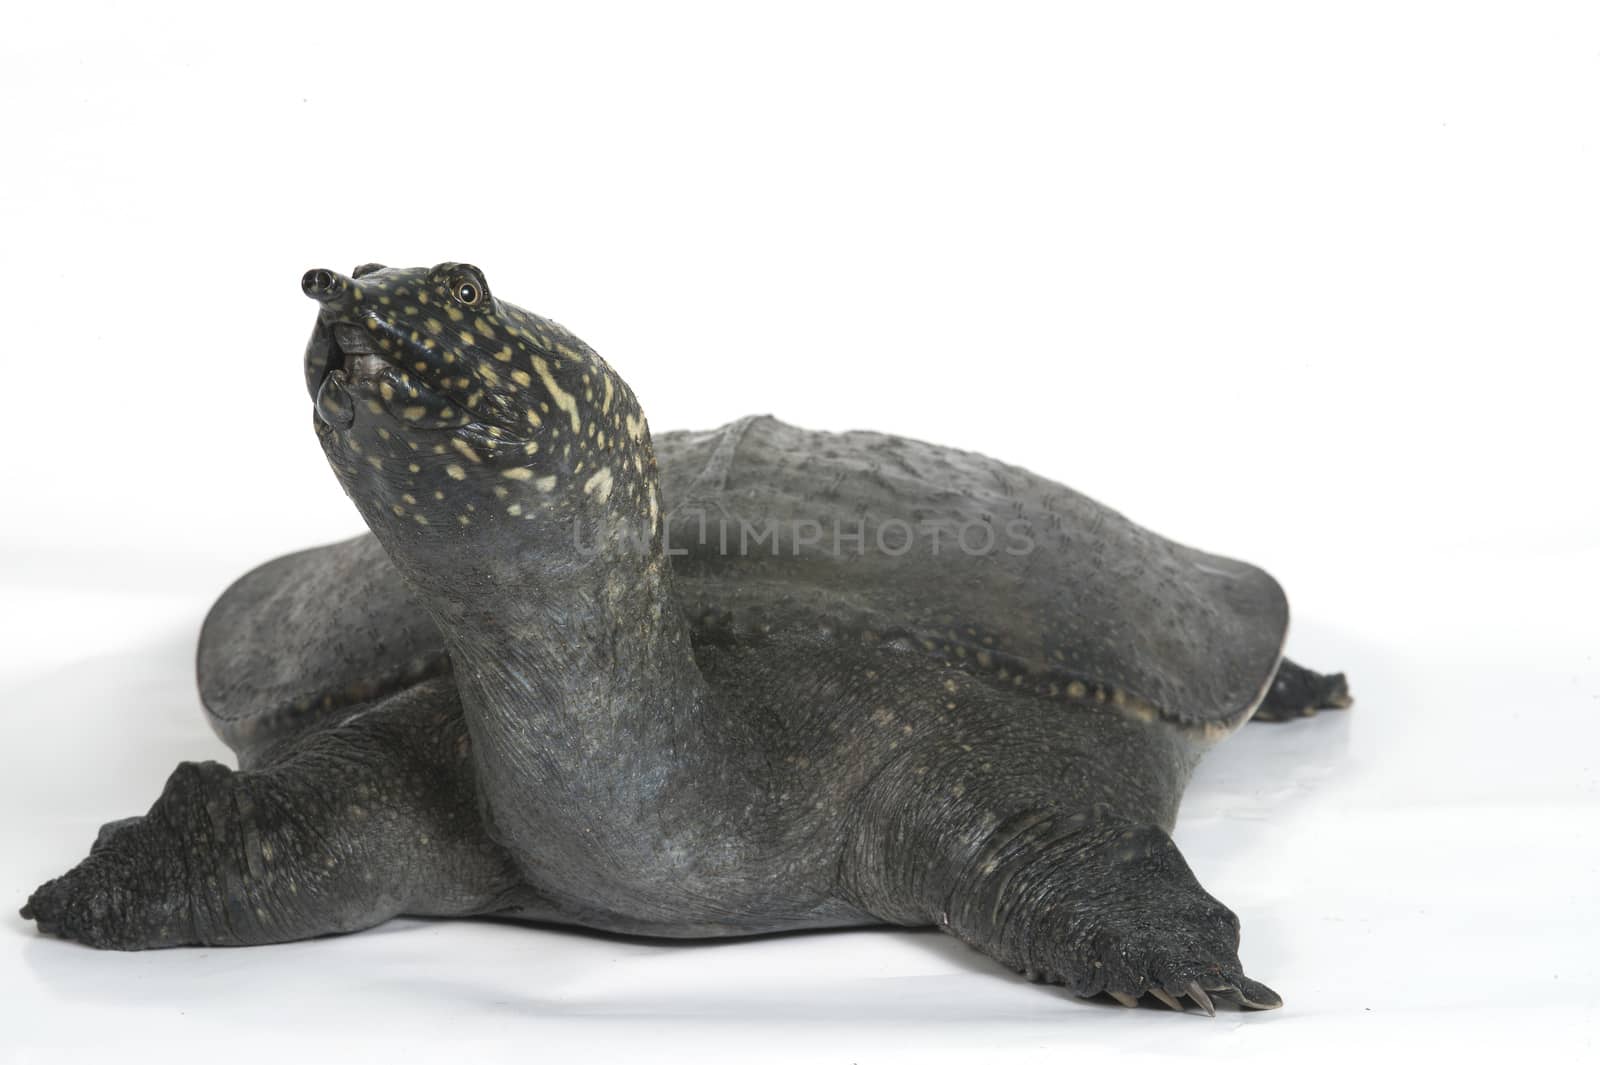 Chinese Soft Shell Turtle isolated on white background.